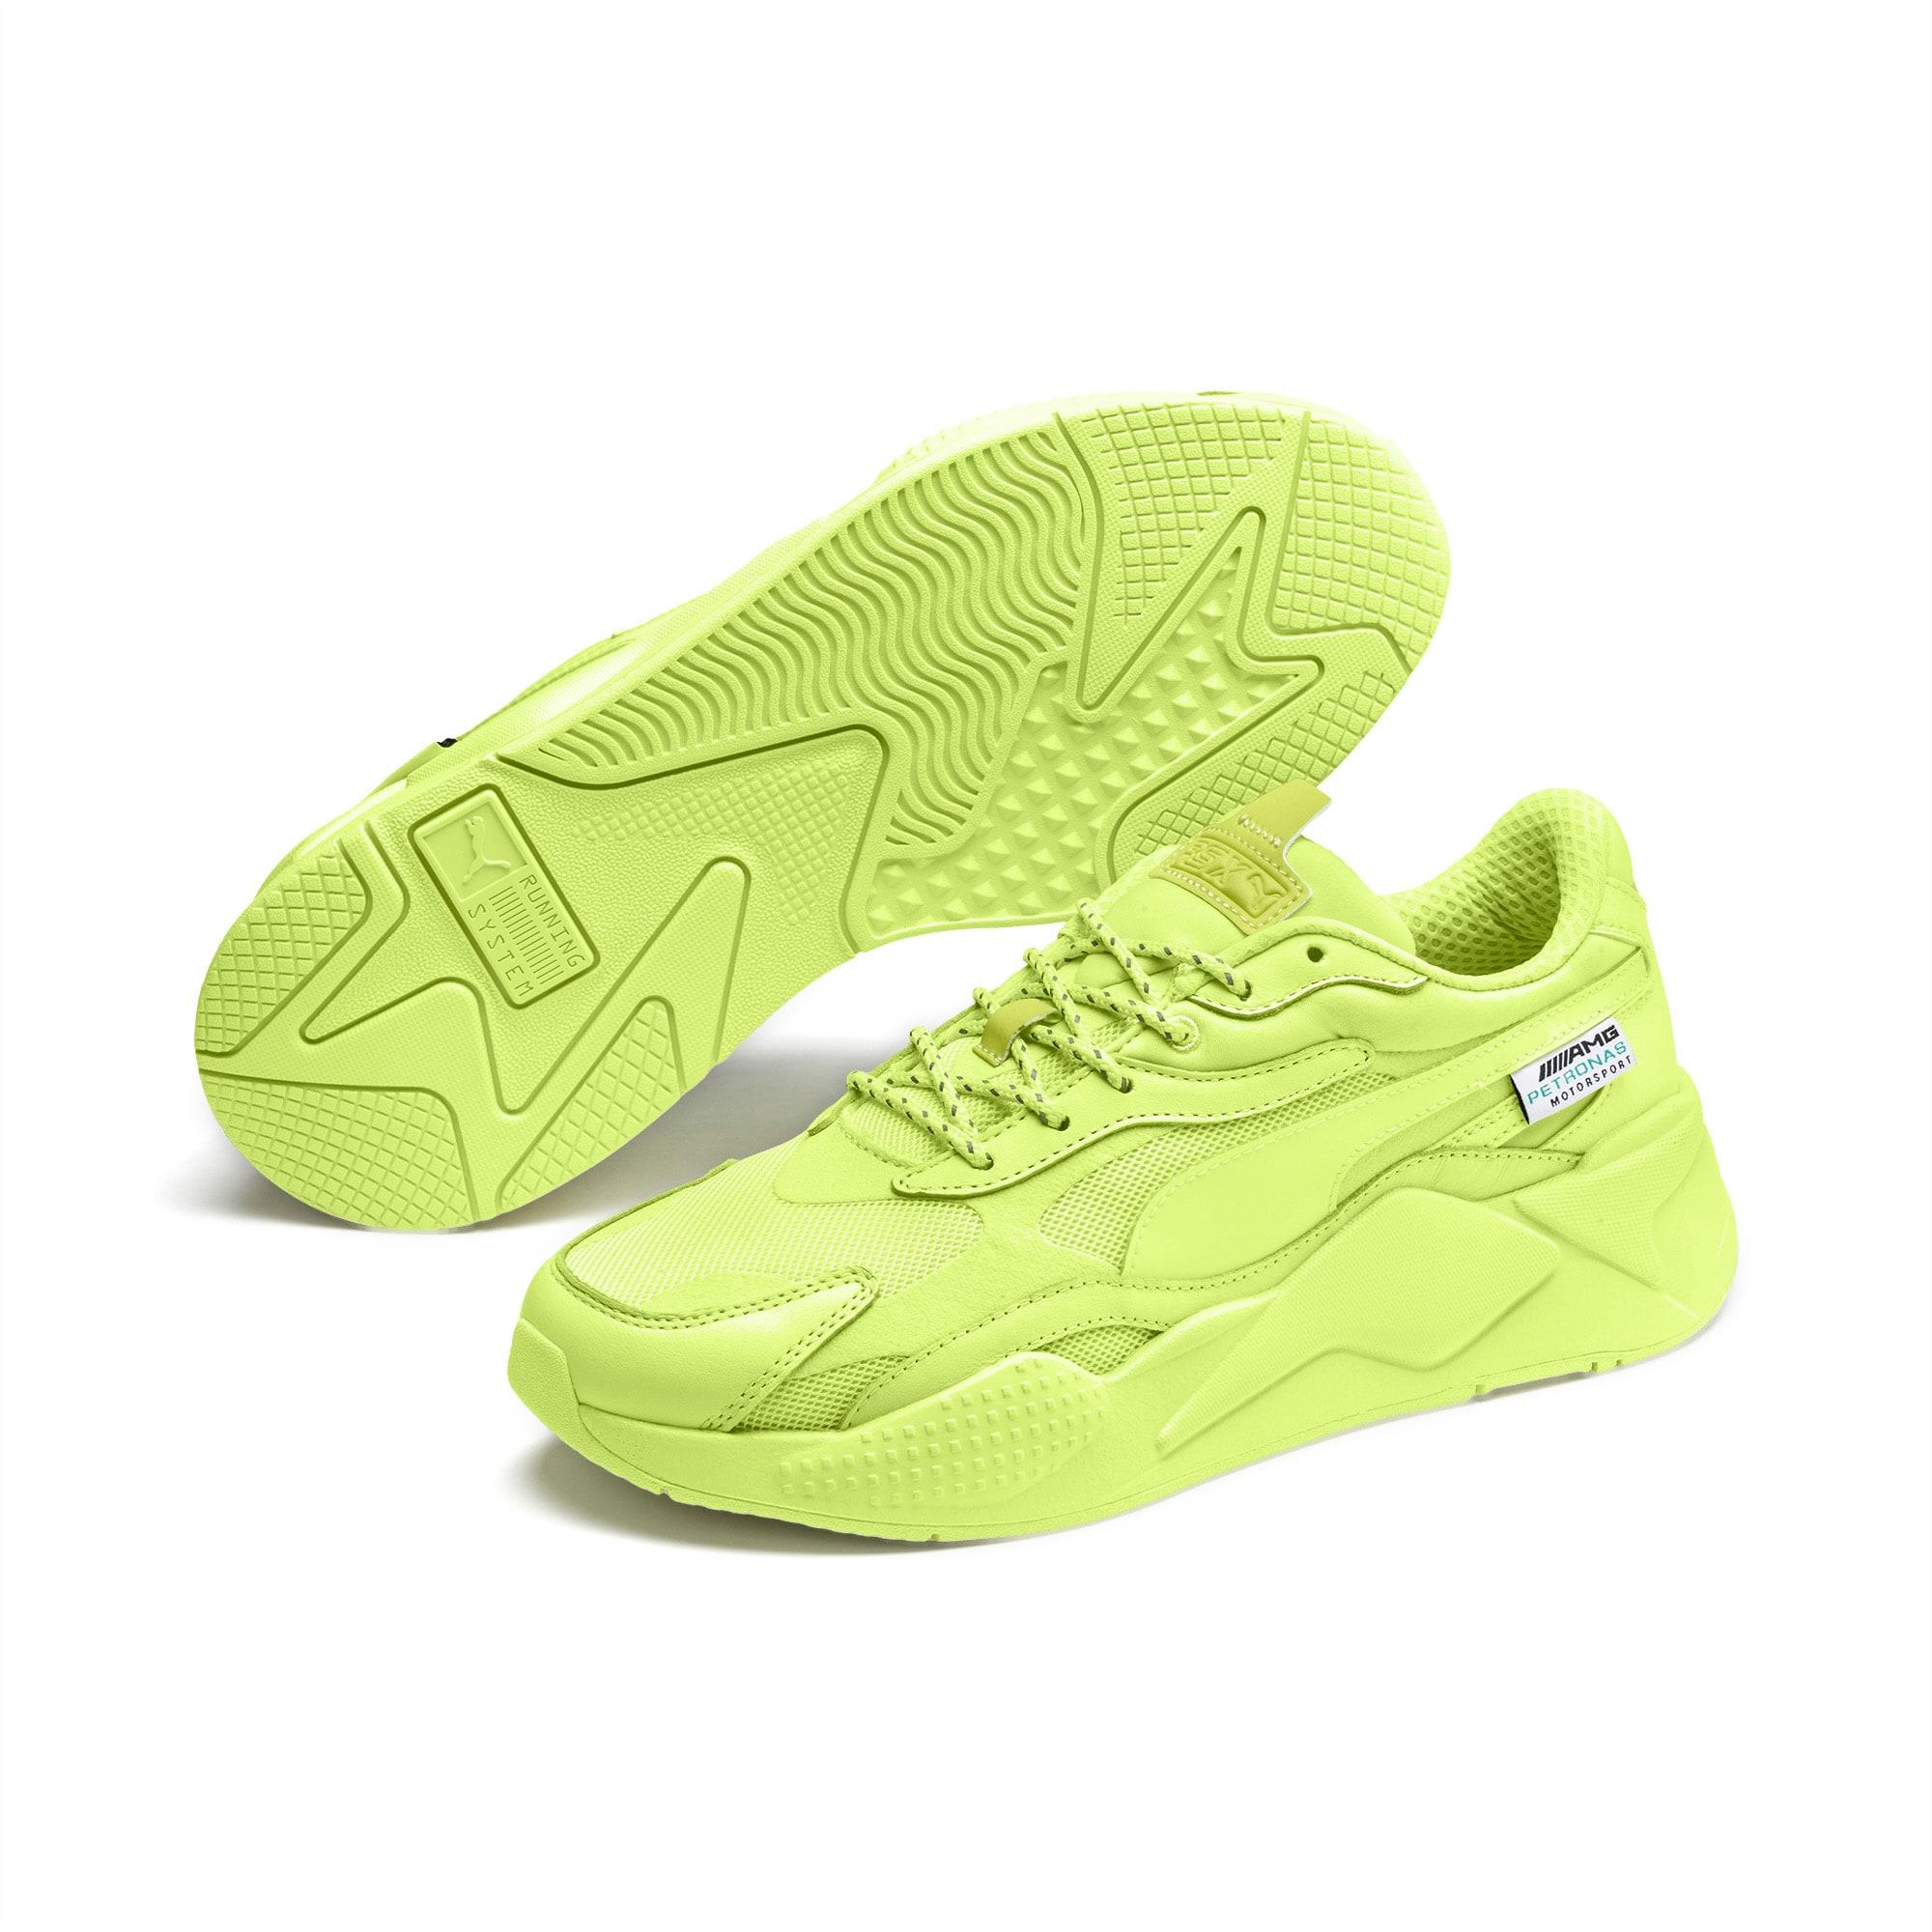 PUMA Synthetic Mercedes Amg Petronas Rs-x3 Sneakers in Green for Men - Lyst